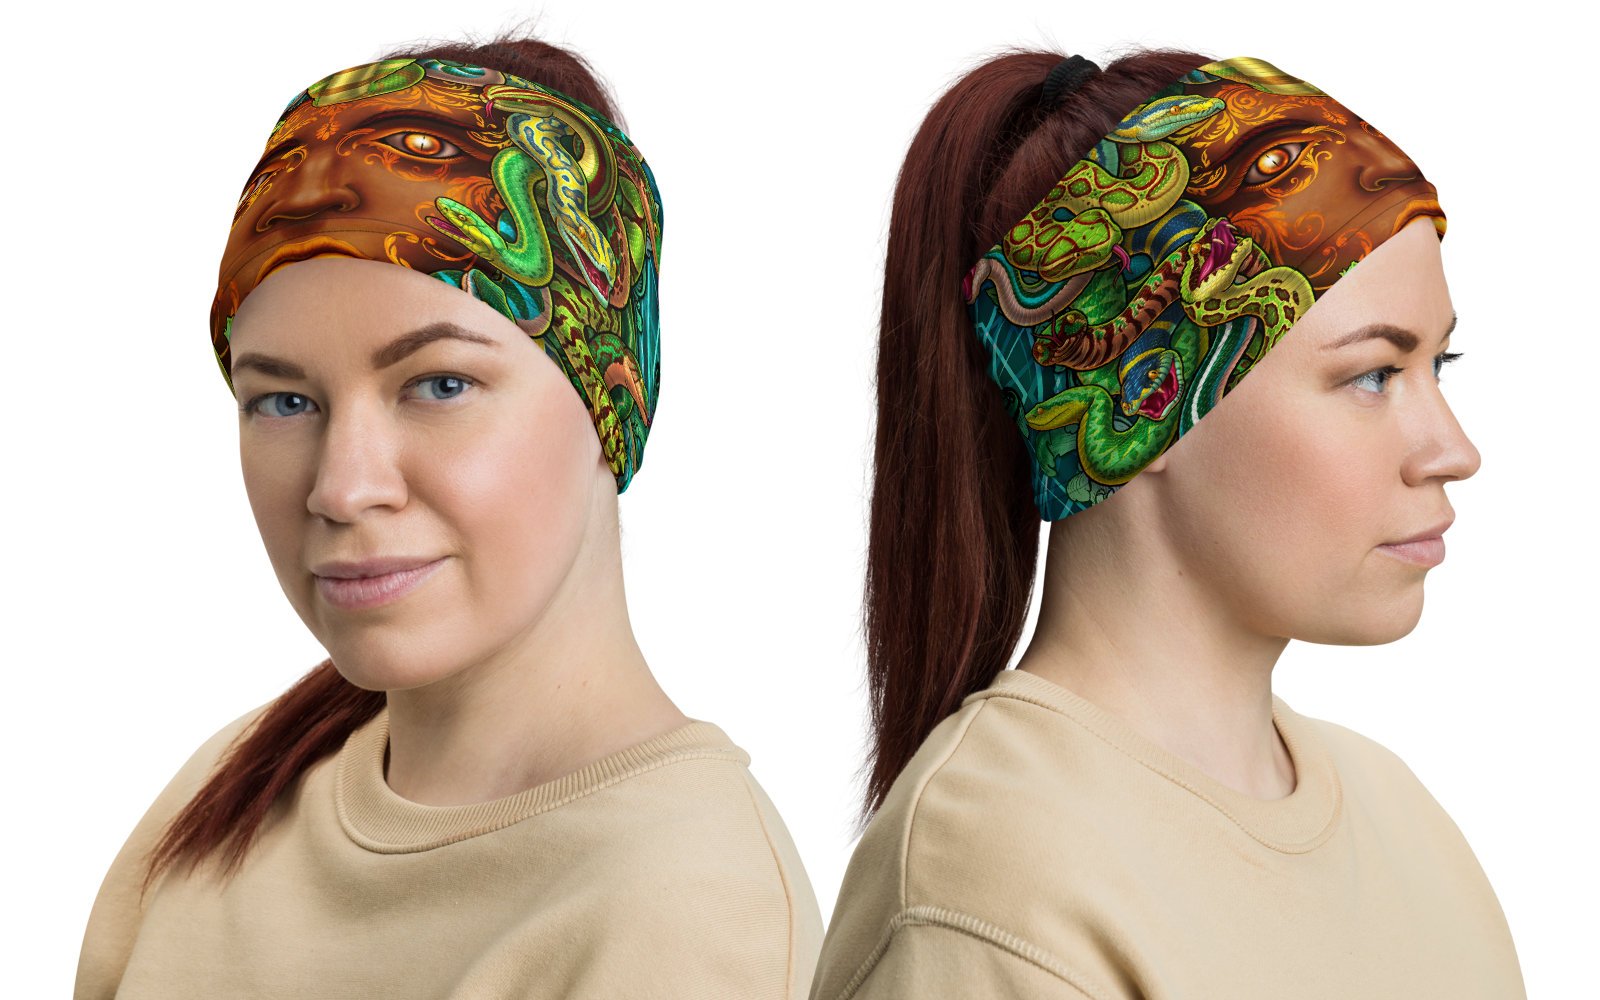 Medusa Neck Gaiter, Face Mask, Head Covering, Snakes Headband, Fantasy Outfit - Nature - Abysm Internal